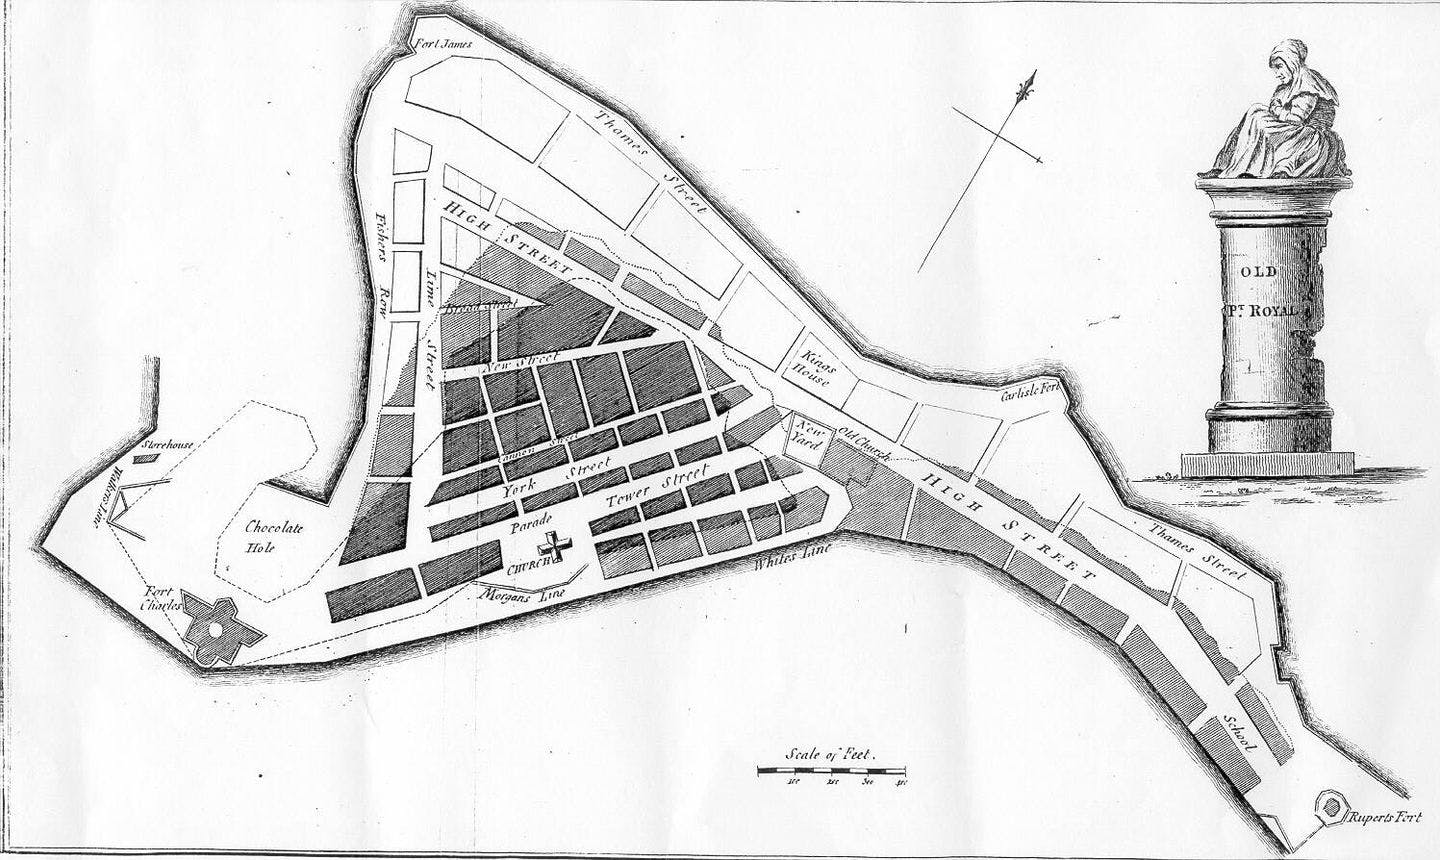 Map of the old Port Royal. White, lost in the 1692 earthquake. Slightly shaded middle section, the part of the city that was flooded by the tsunami. Darkly shaded bottom section is the part of the city that survived. Map: Wikimedia 